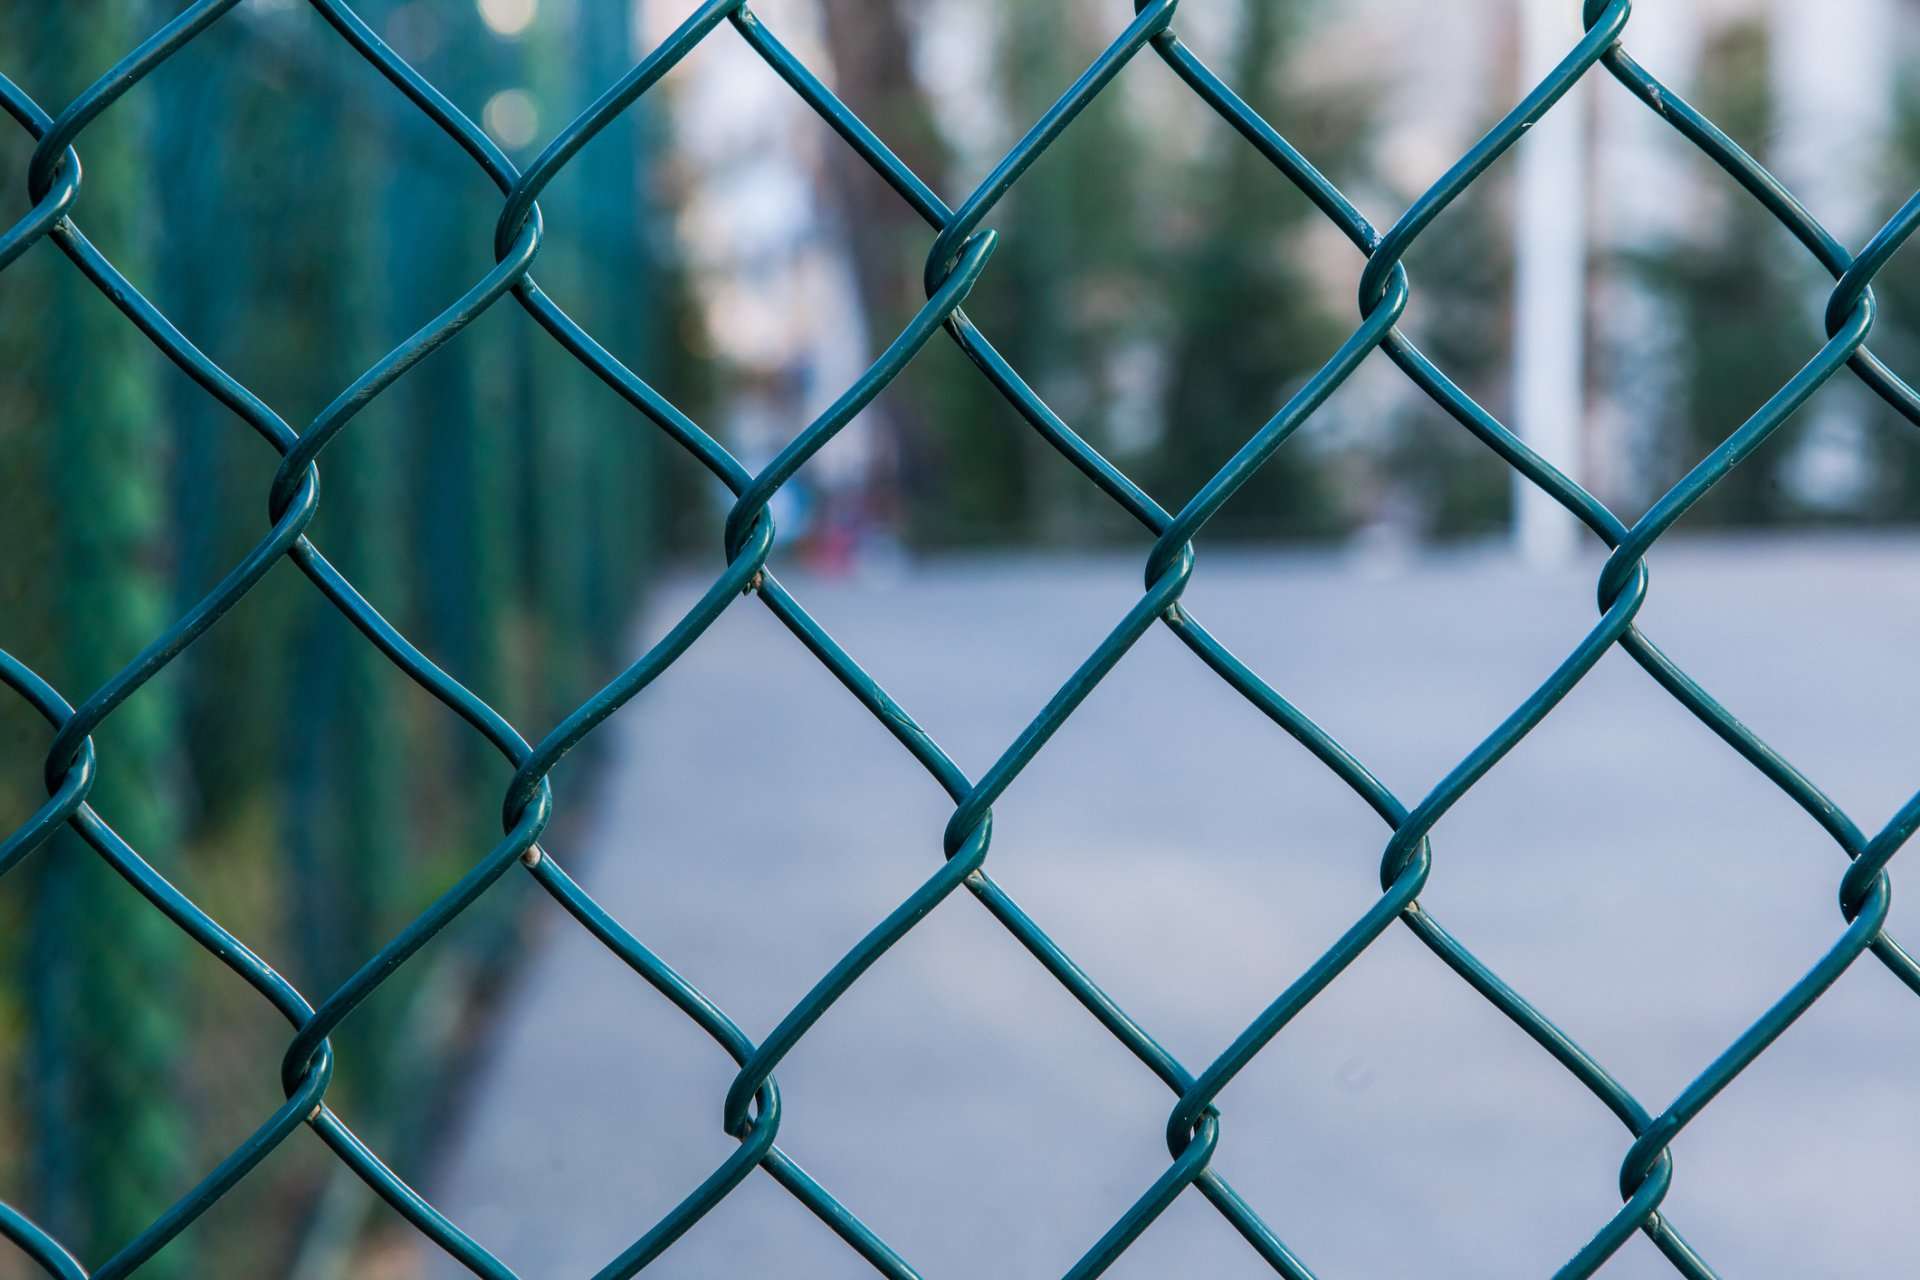 A close up of the chain link fence